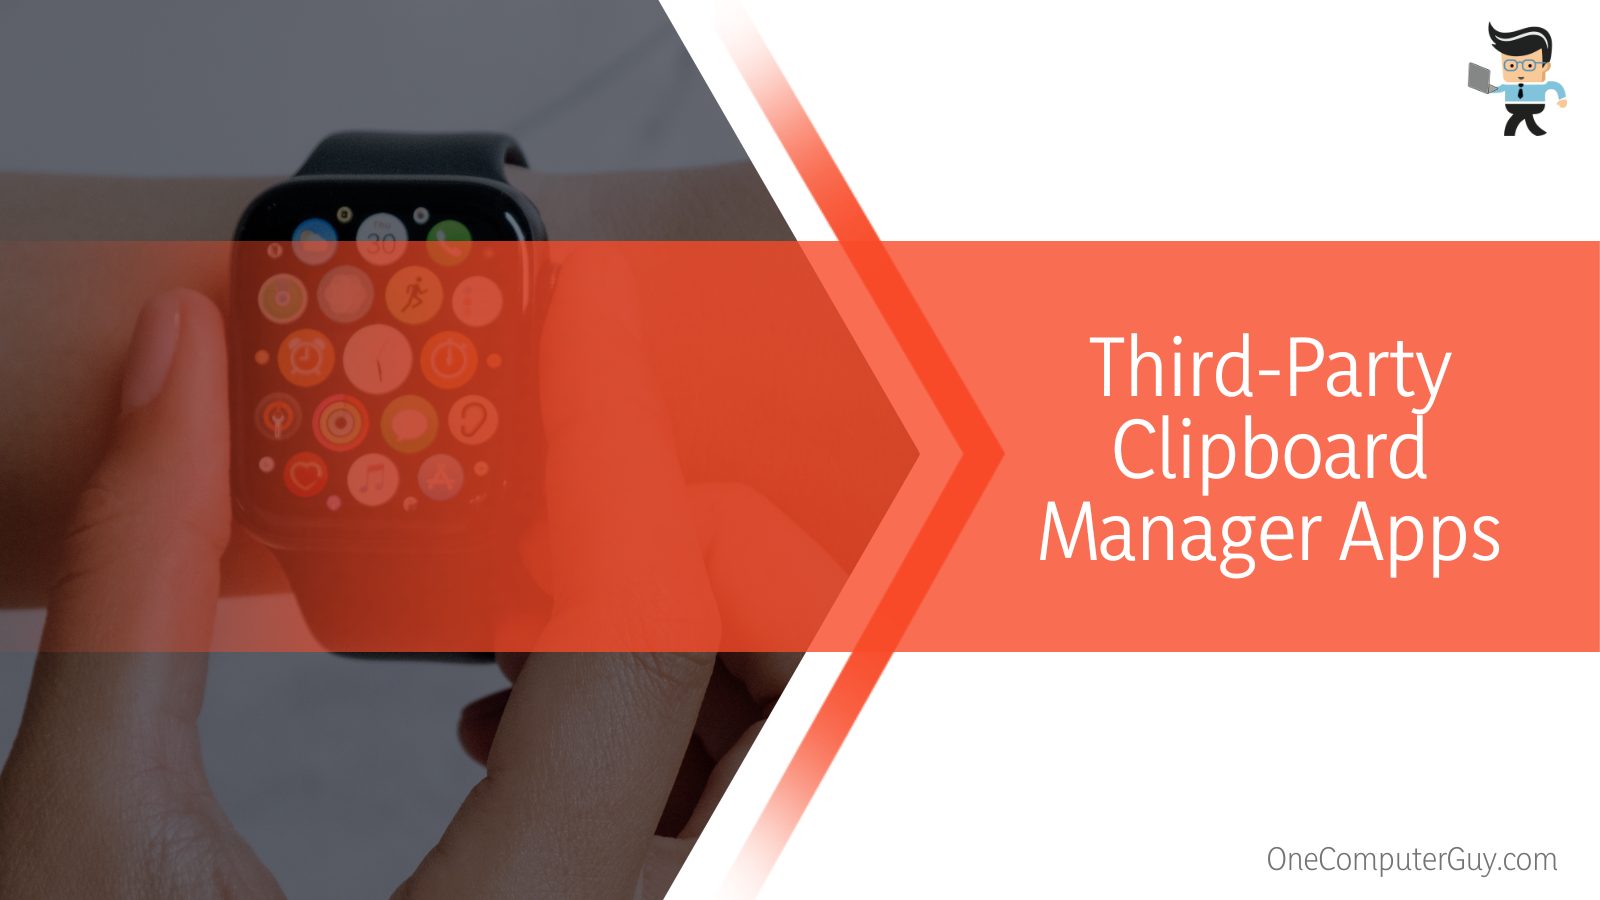 Third-Party Clipboard Manager Apps